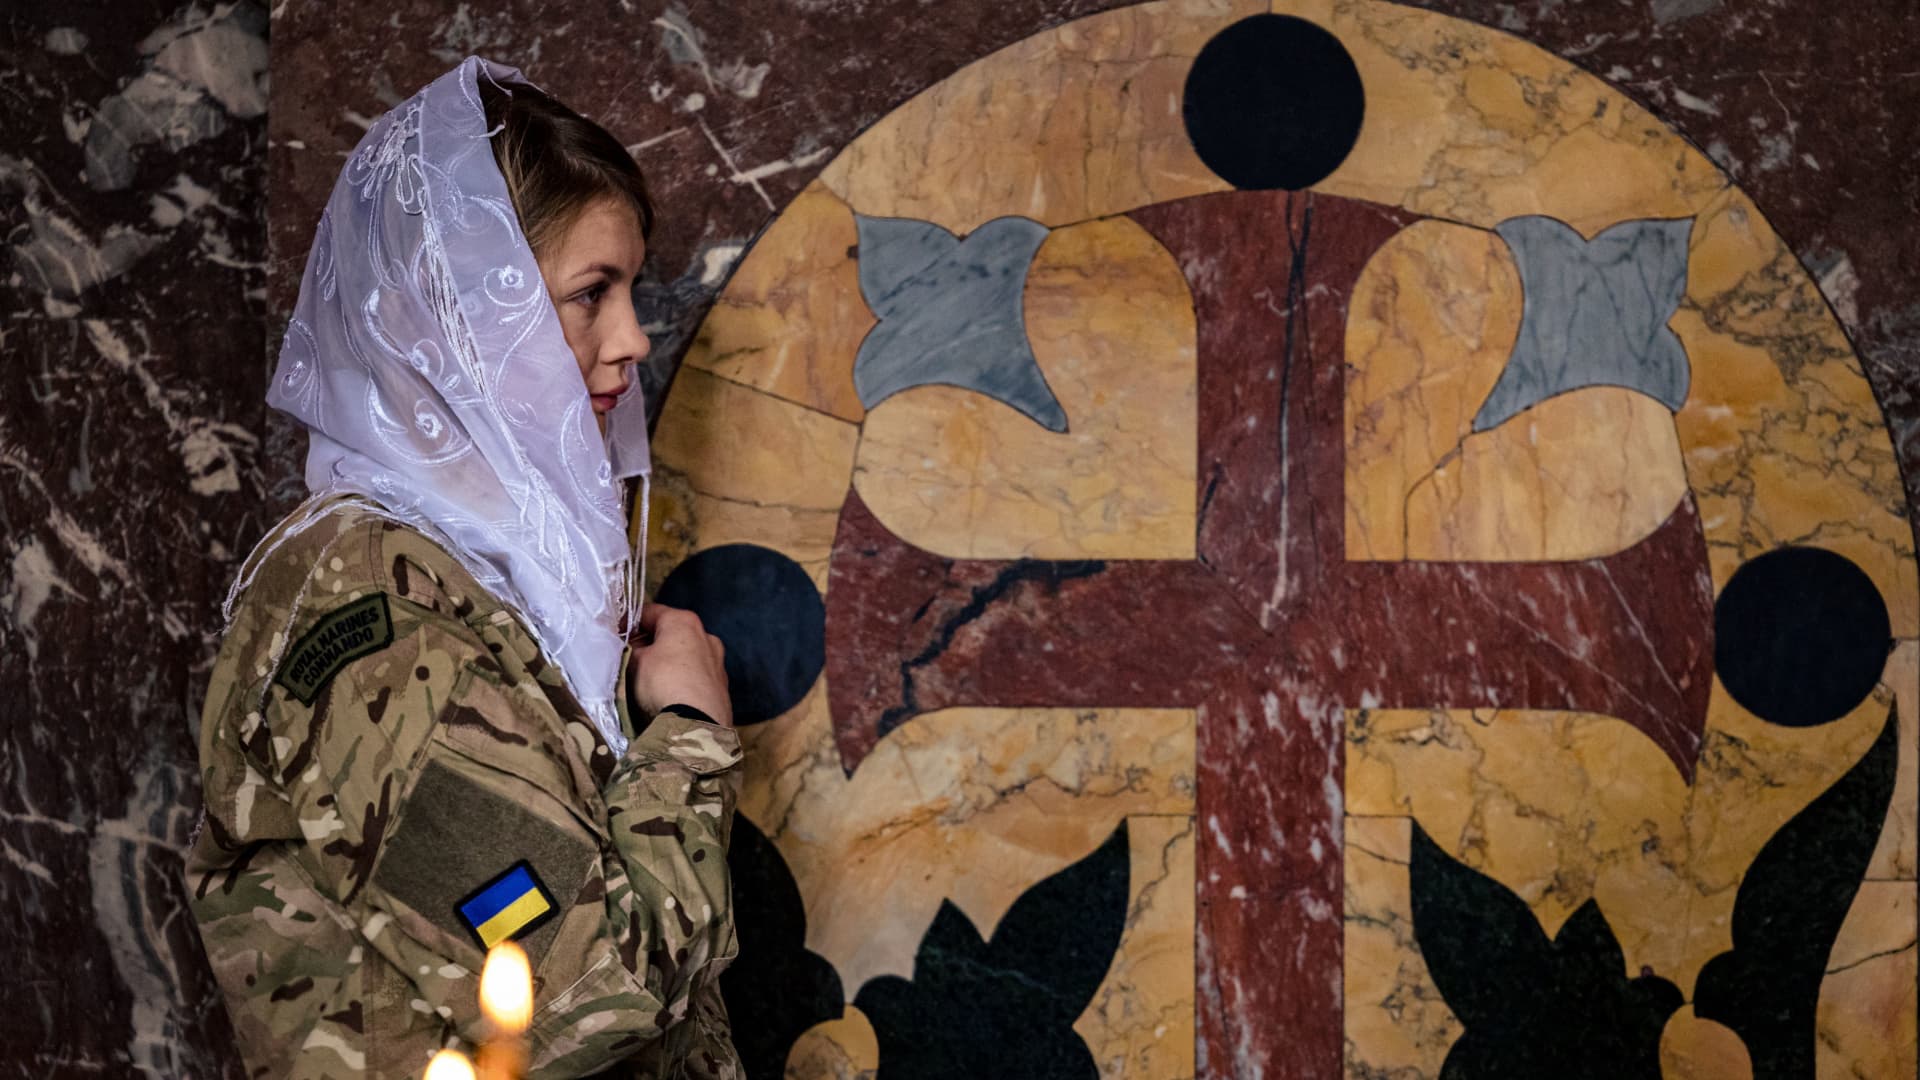 A female Ukrainian soldier crosses herself during an Orthodox Easter service in St. Volodymyr's Cathedral in Kyiv on April 24, 2022, two months after the start of Russia's invasion of Ukraine.